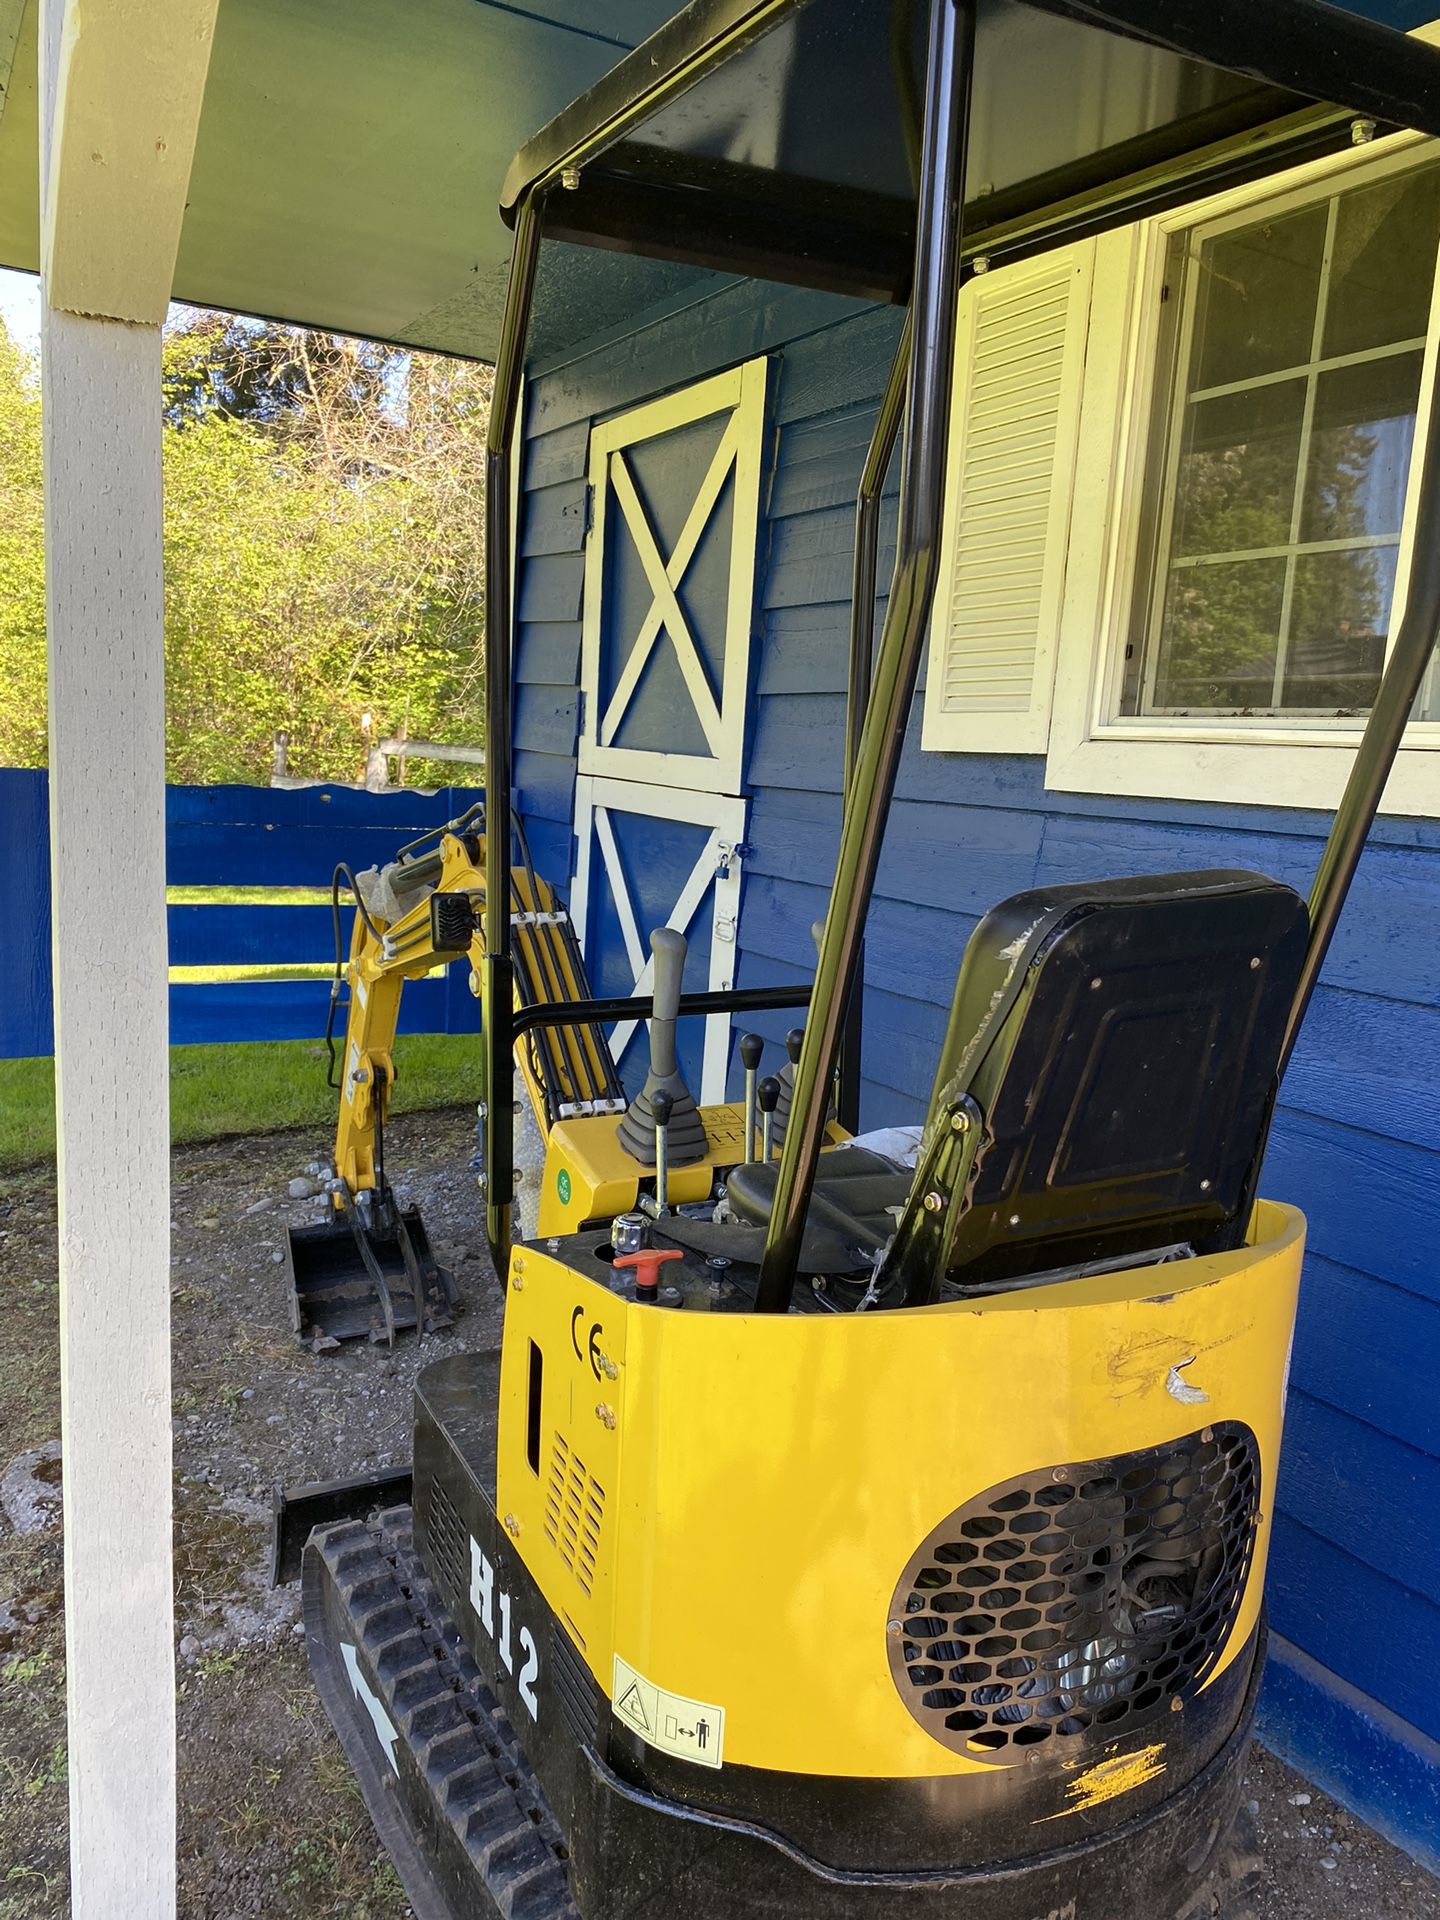 I am selling a mini excavator in perfect condition, working 100%. Any questions. I will answer.